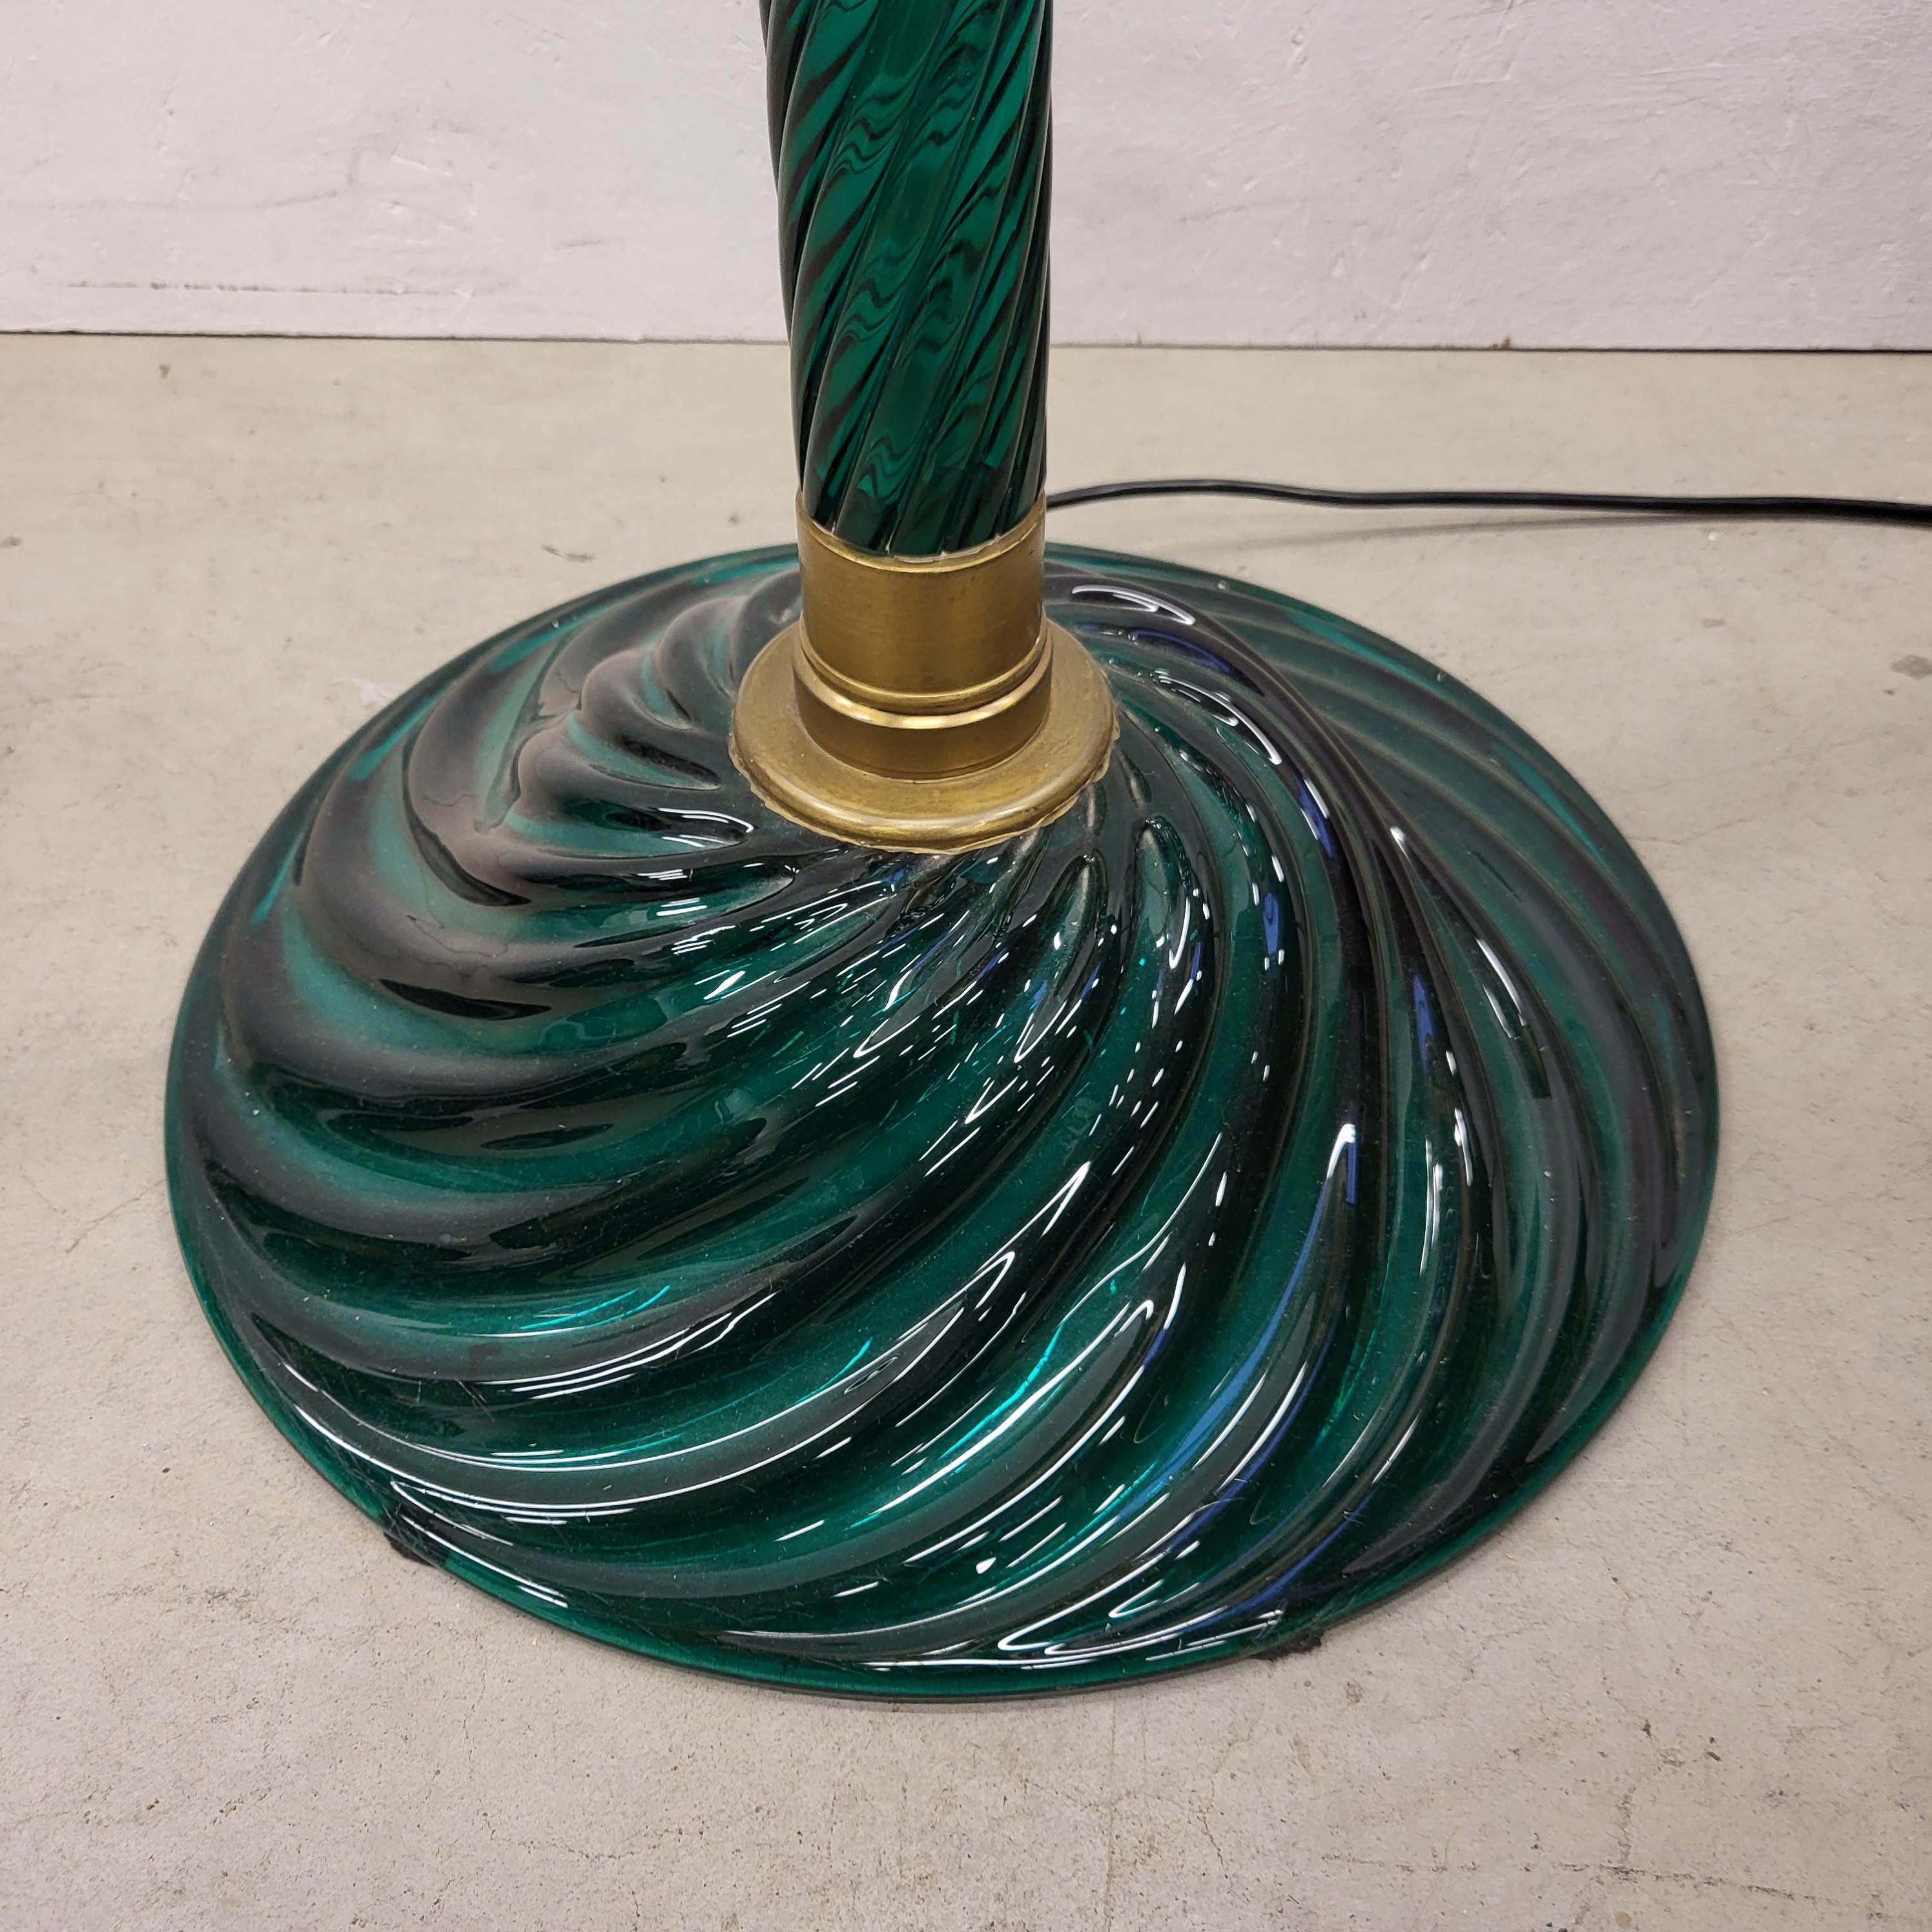 Hand-Crafted Floor Lamp by Carlo Scarpa, Venini Italy, Murano Glass 1940s